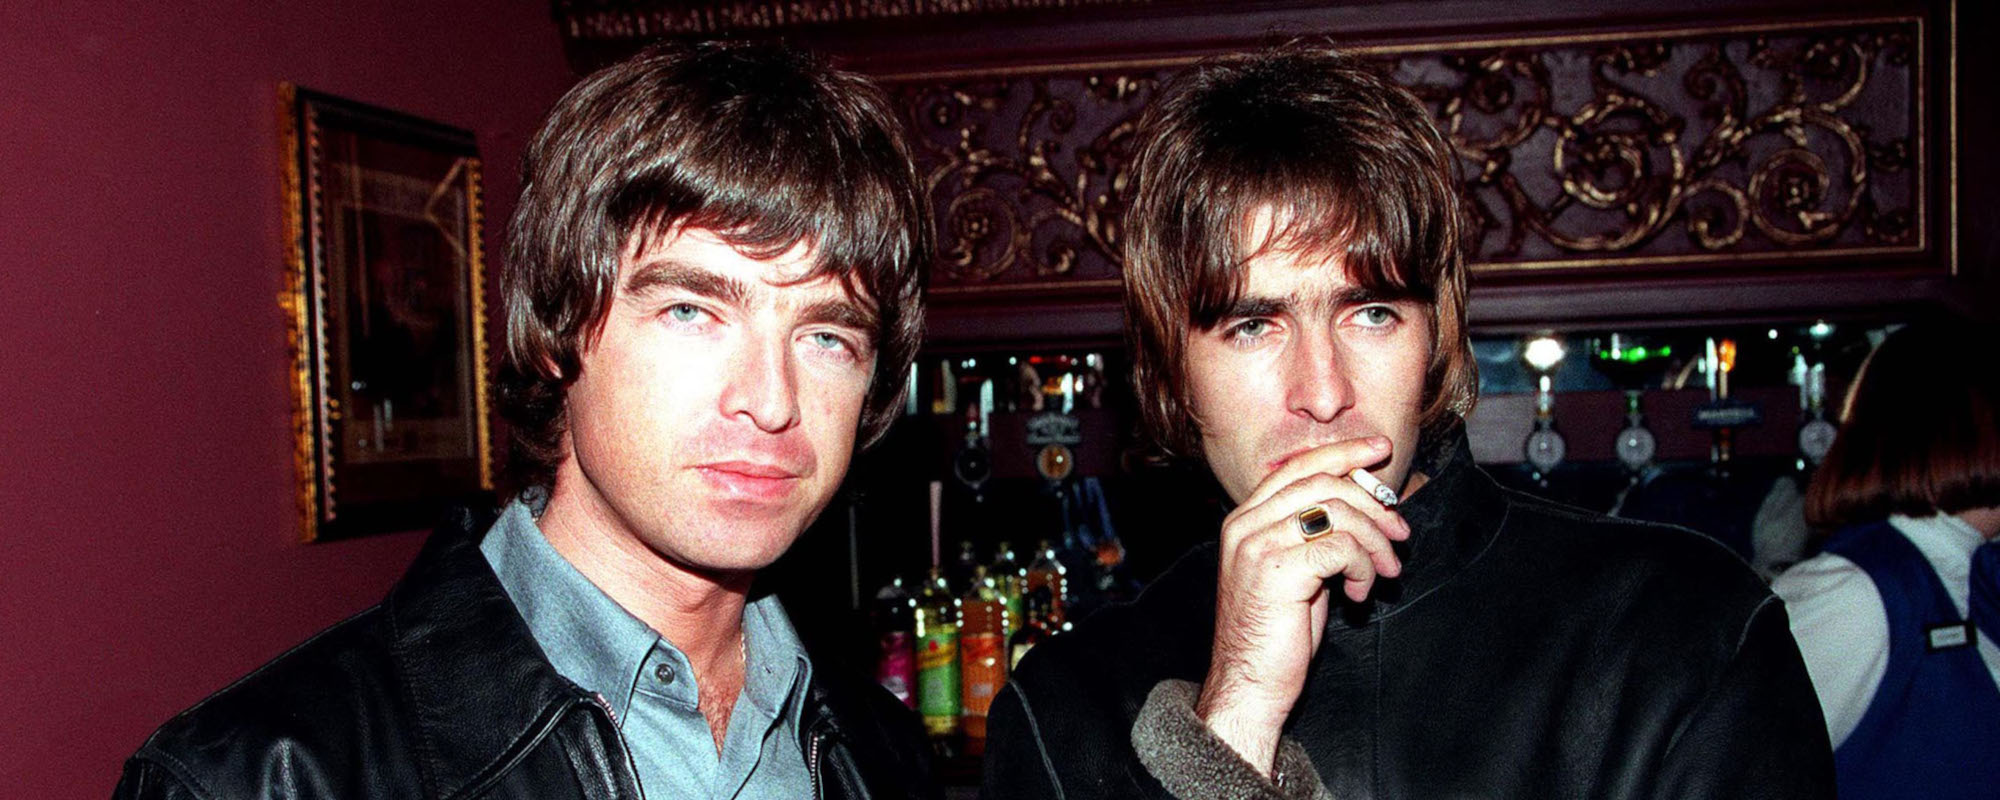 Liam Gallagher Will Celebrate Oasis’ ‘Definitely Maybe’ on Tour for Its 30th Anniversary